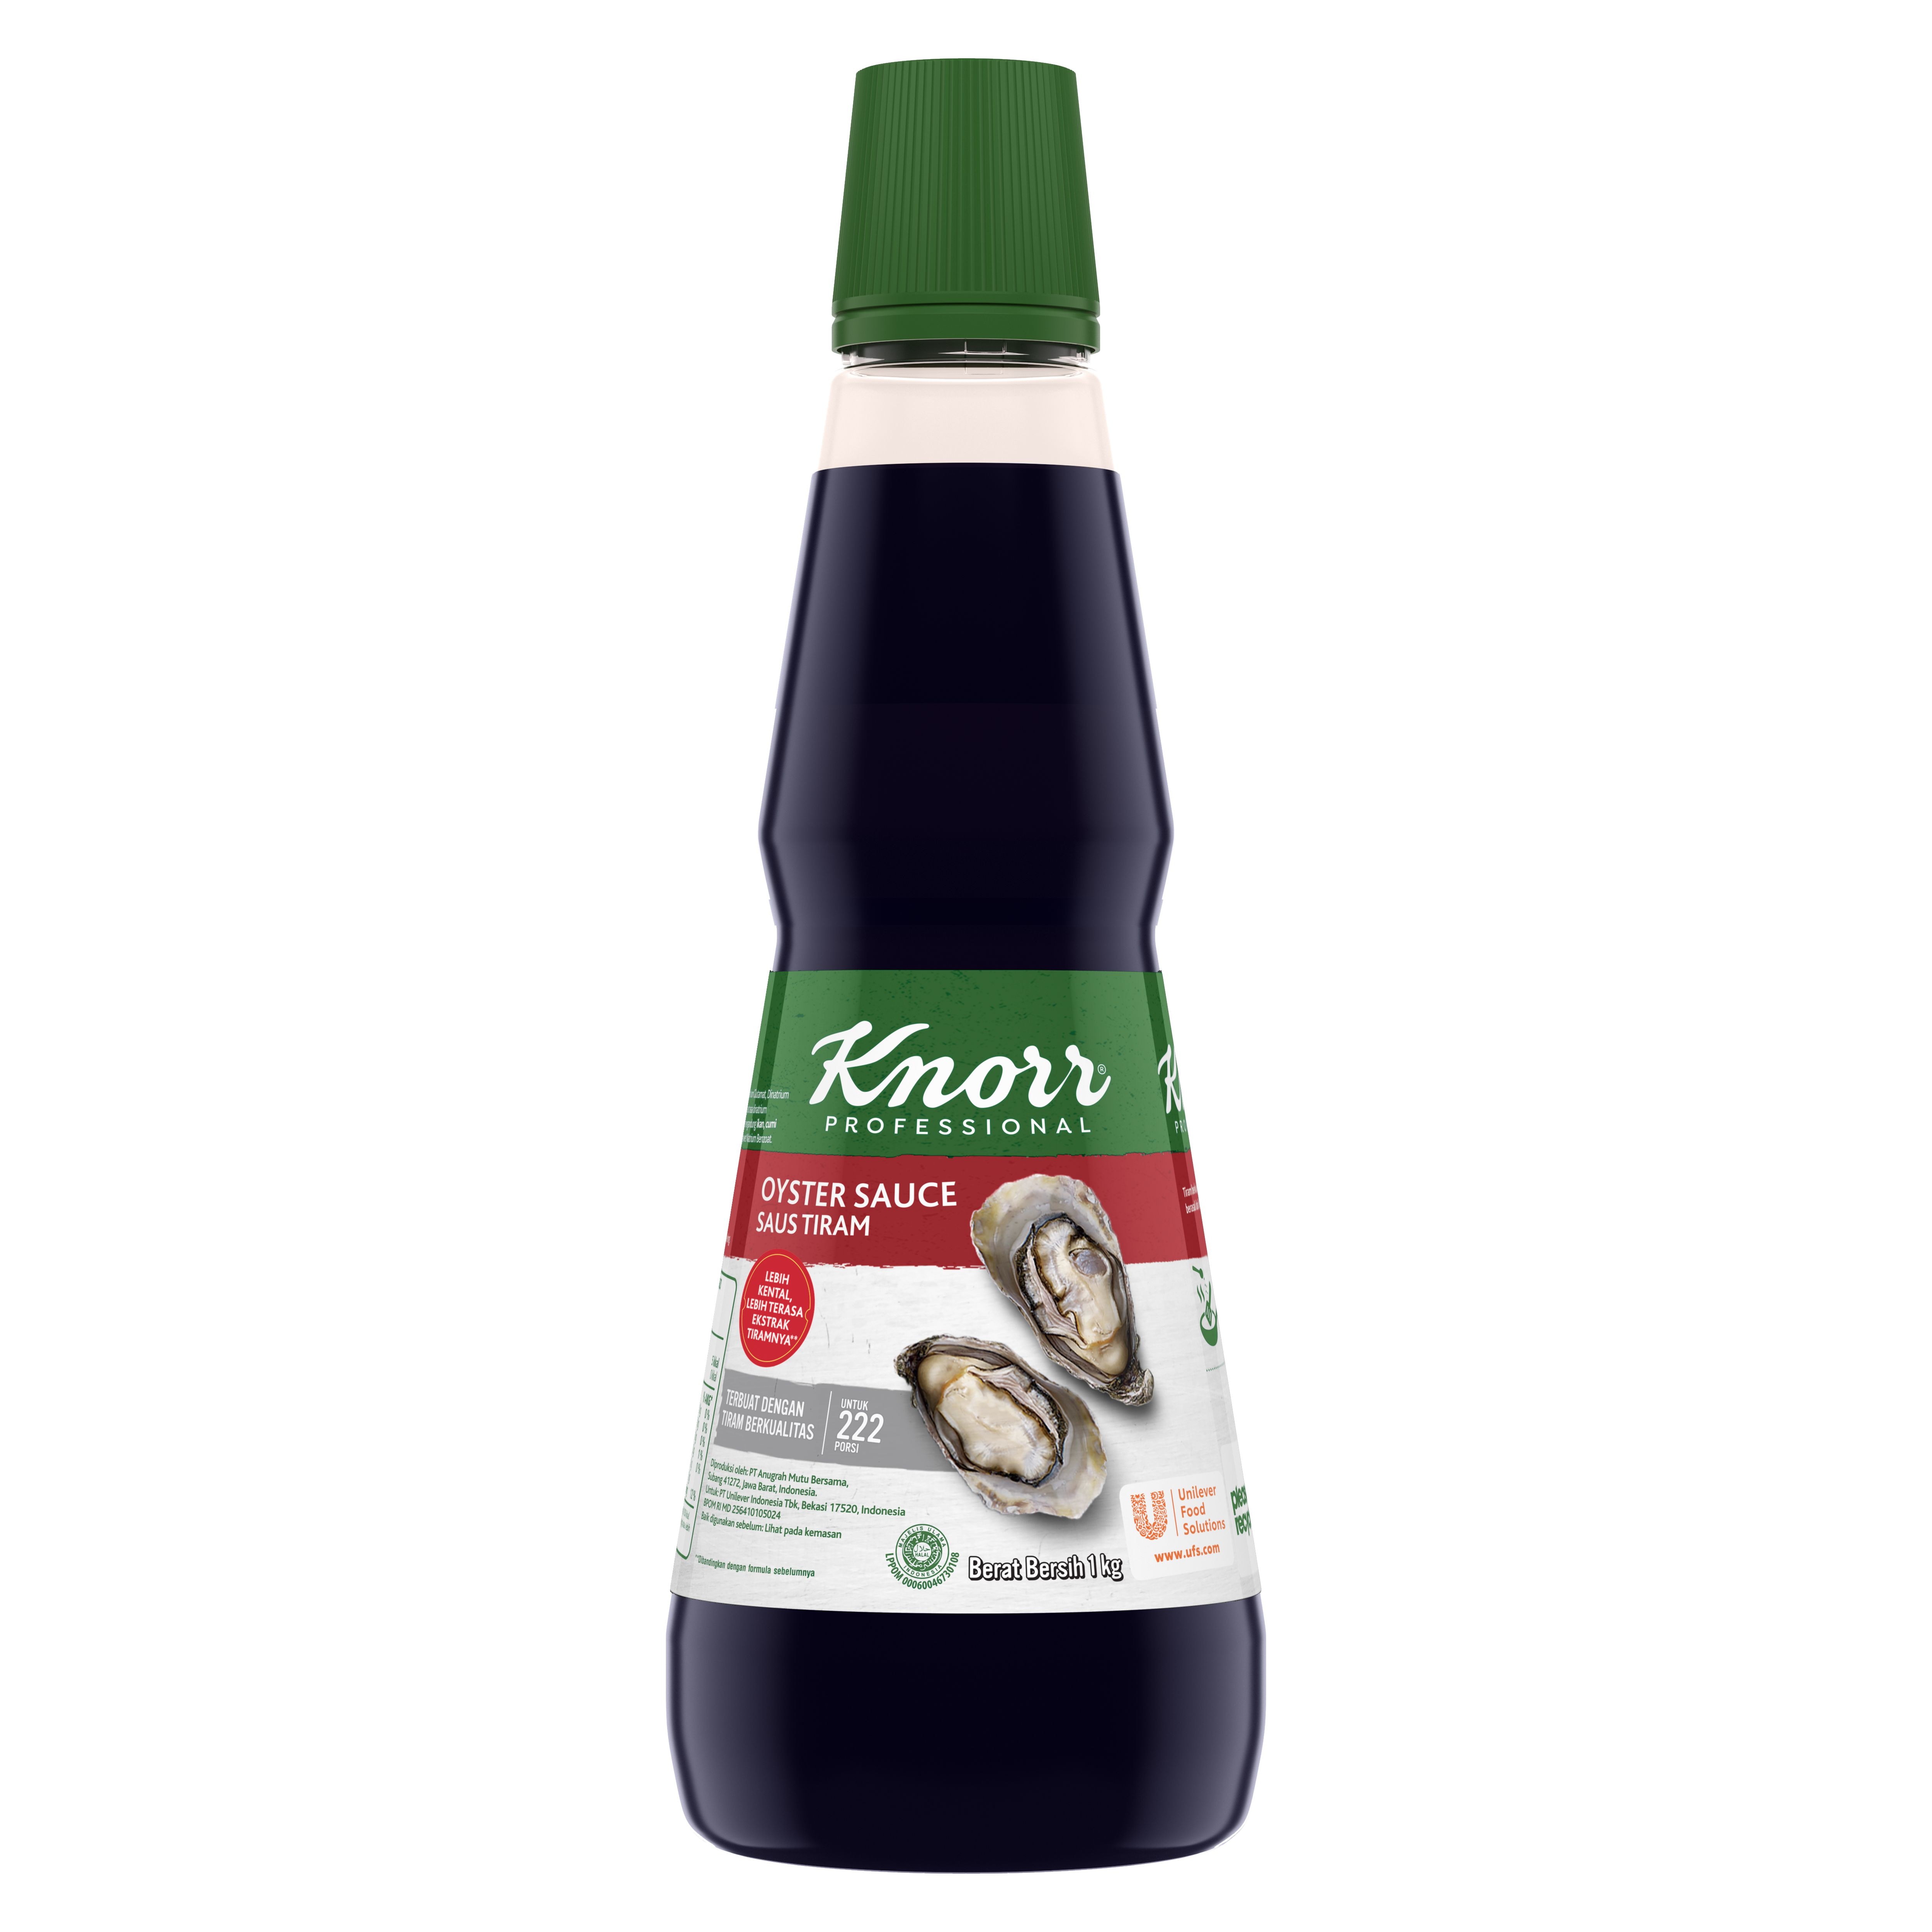 Knorr Oyster Sauce 1kg - New Knorr Oyster Sauce, Produce a combination of sweet and savory that fits and strengthens the natural color of the dish, suitable for Indonesian tastes